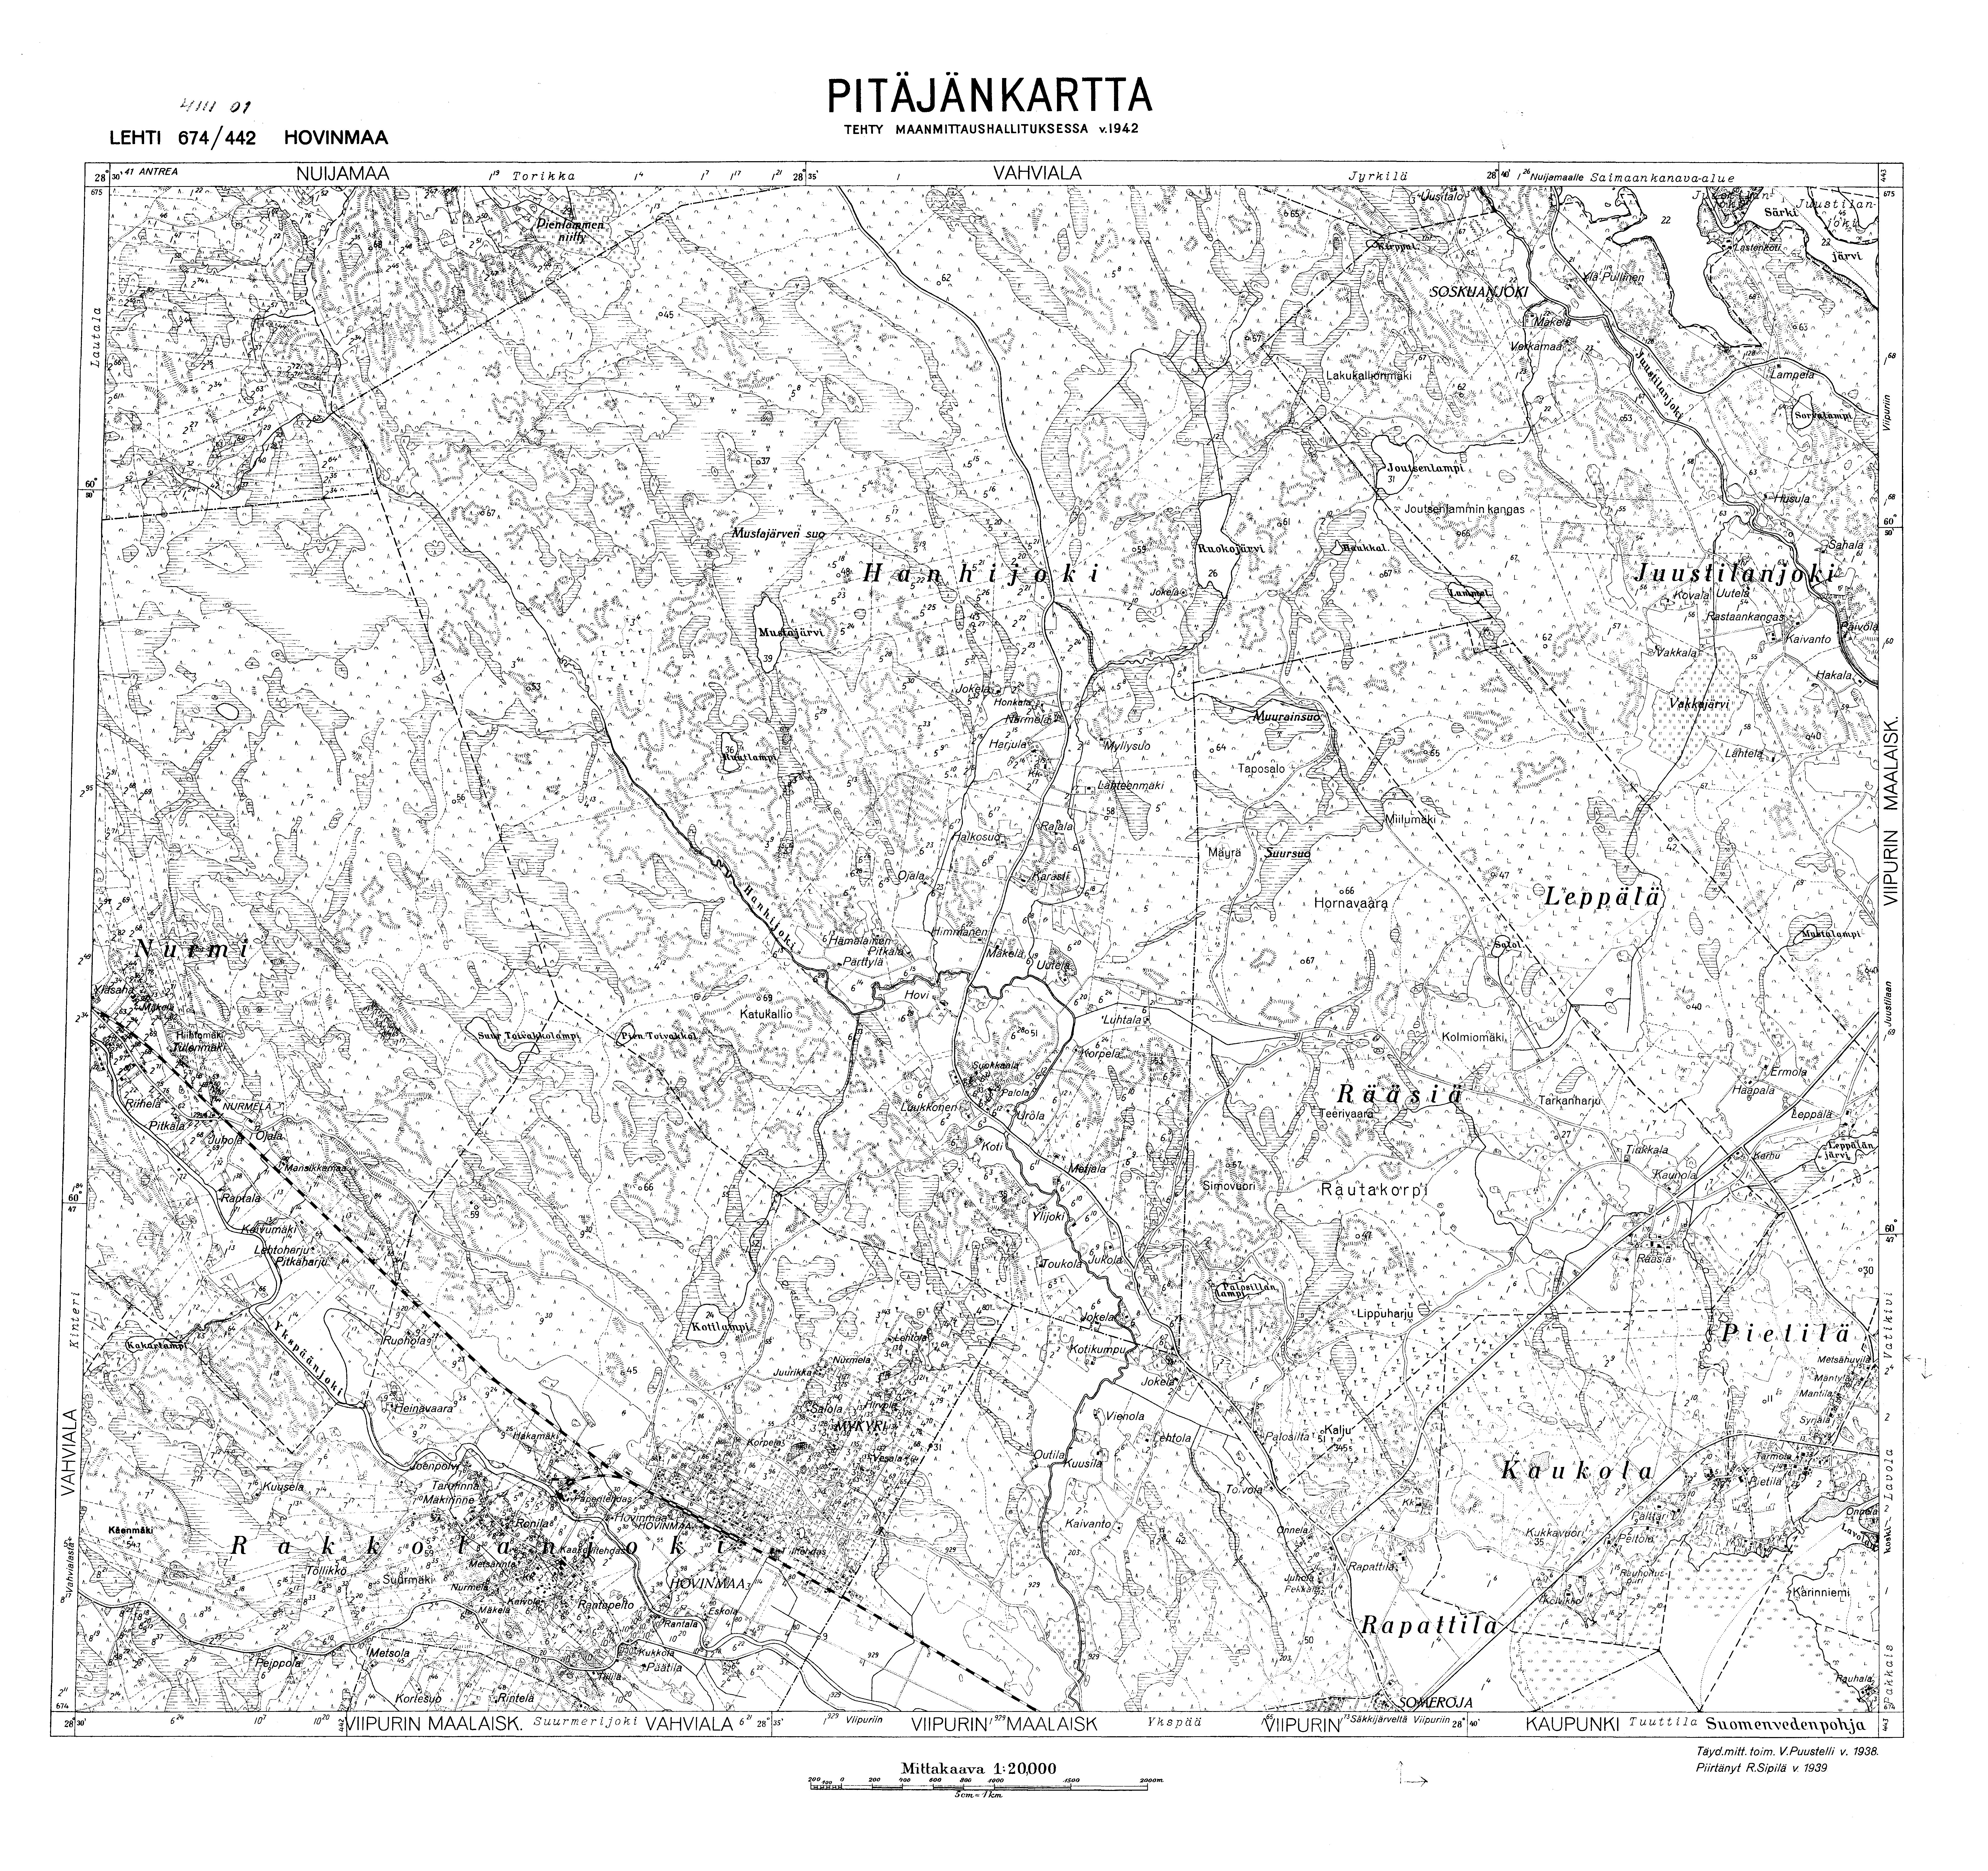 Bulatnoje Village Site. Hovinmaa. Pitäjänkartta 411101. Parish map from 1939. Use the zooming tool to explore in higher level of detail. Obtain as a quality print or high resolution image